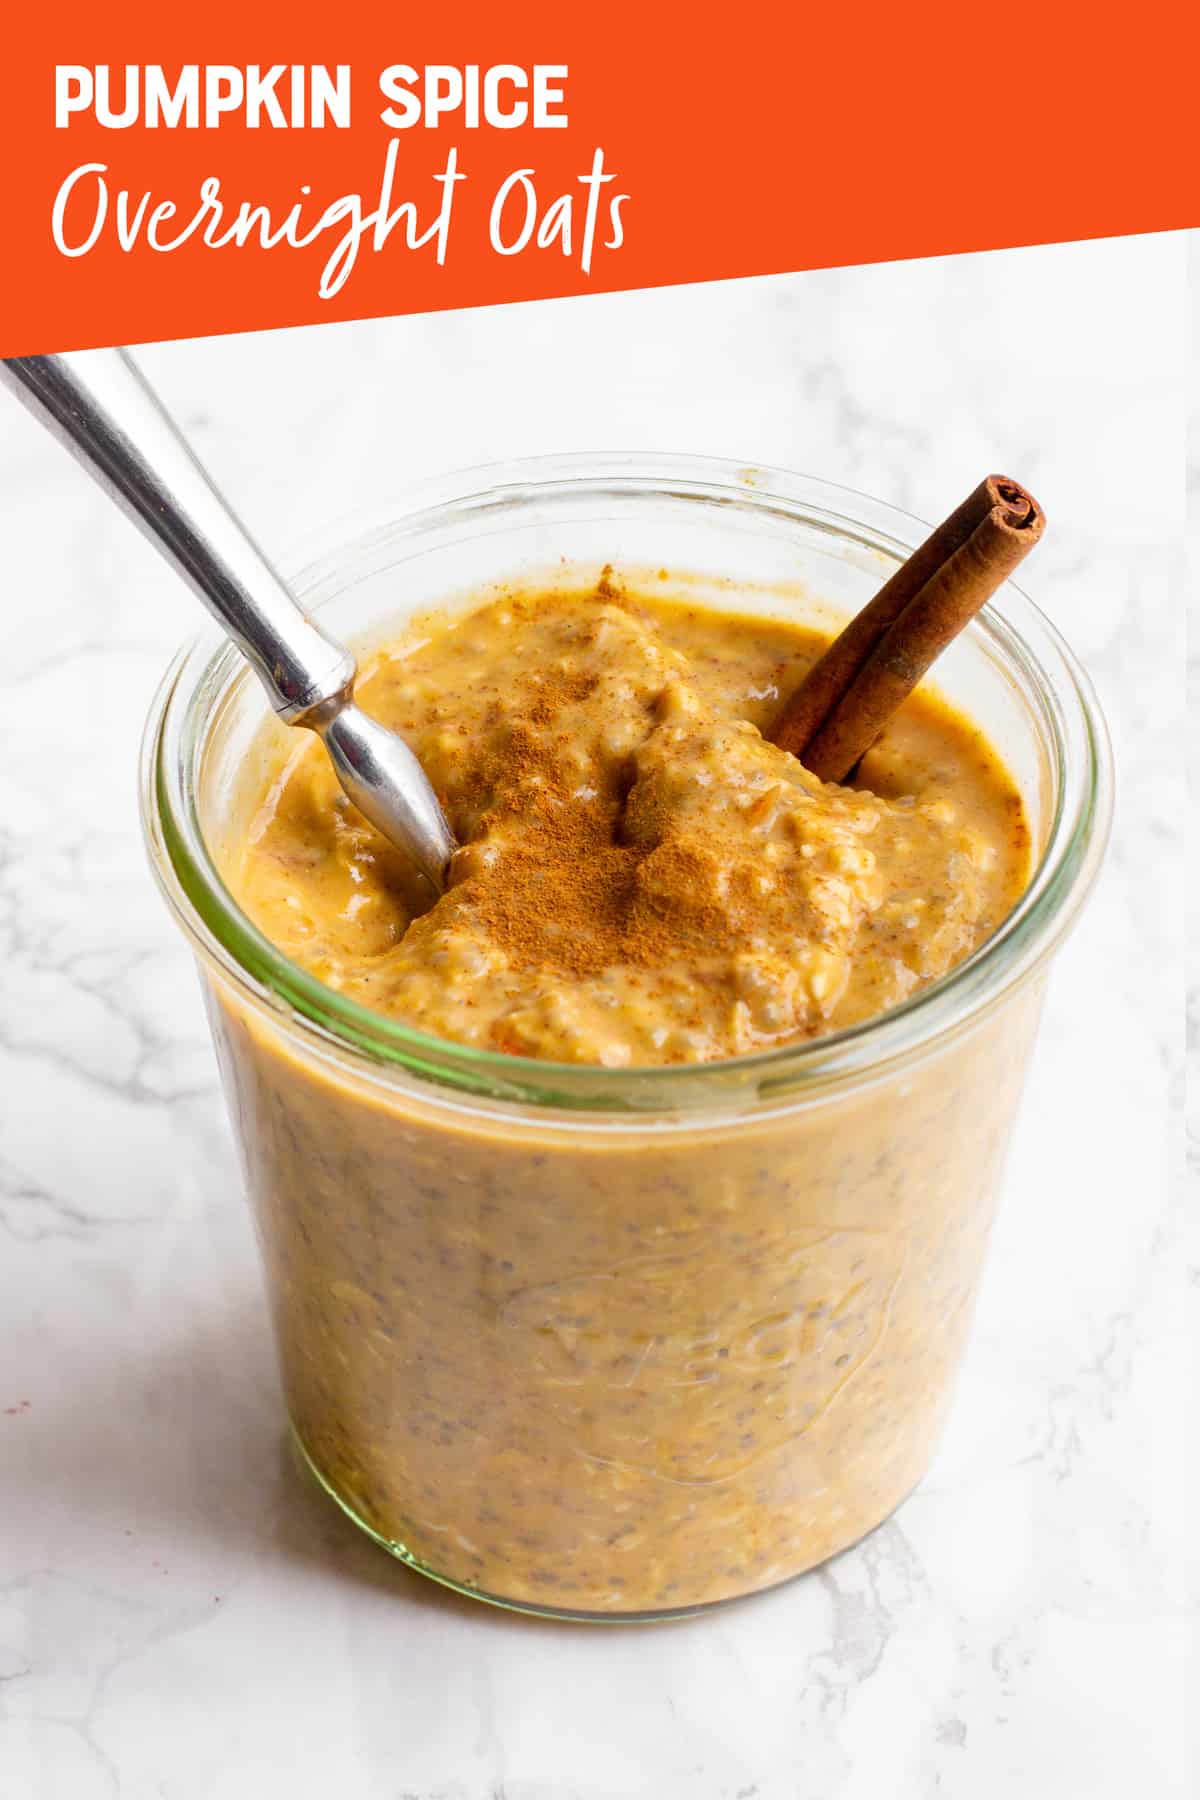 A clear glass jar filled with Pumpkin Spice Overnight Oats, with a spoon sticking out. A text overlay reads "Pumpkin Spice Overnight Oats."